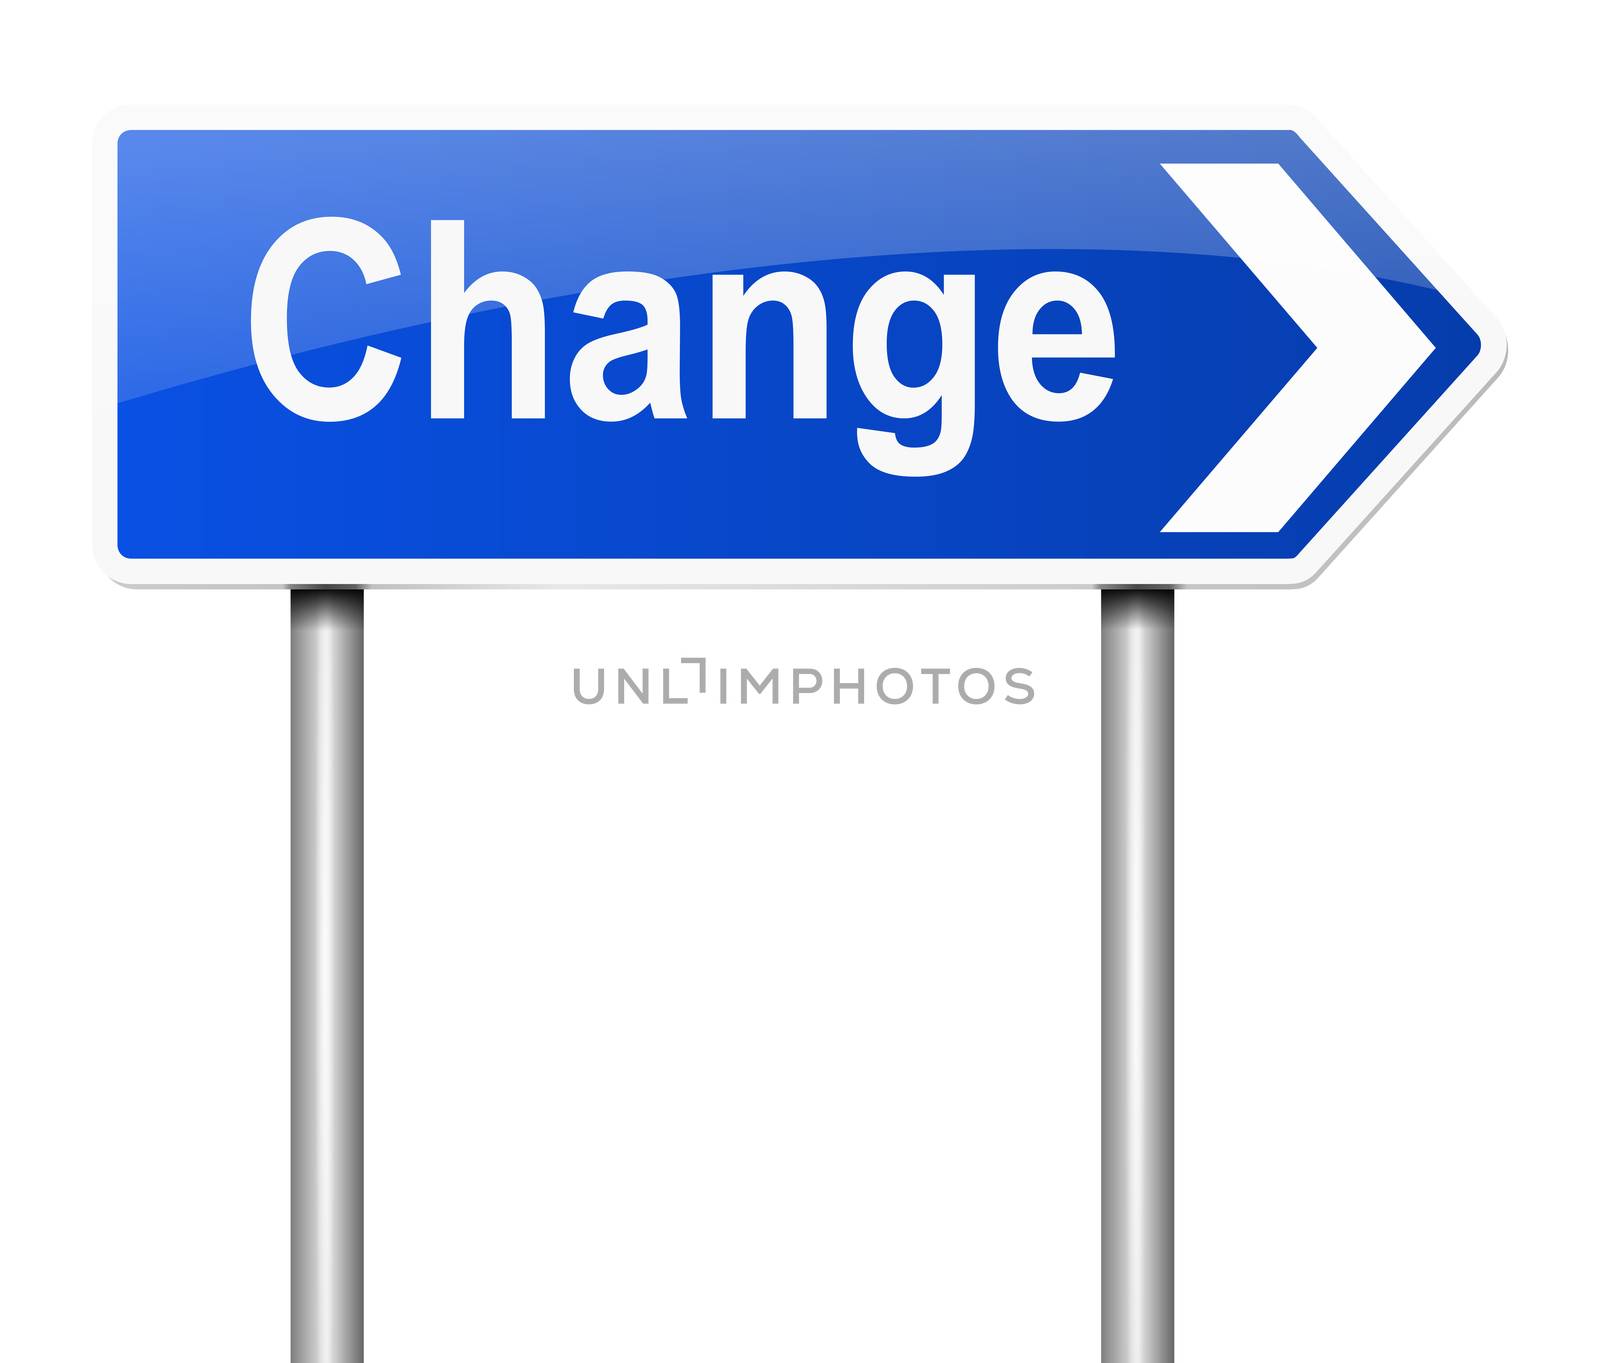 Illustration depicting a sign with a change concept.